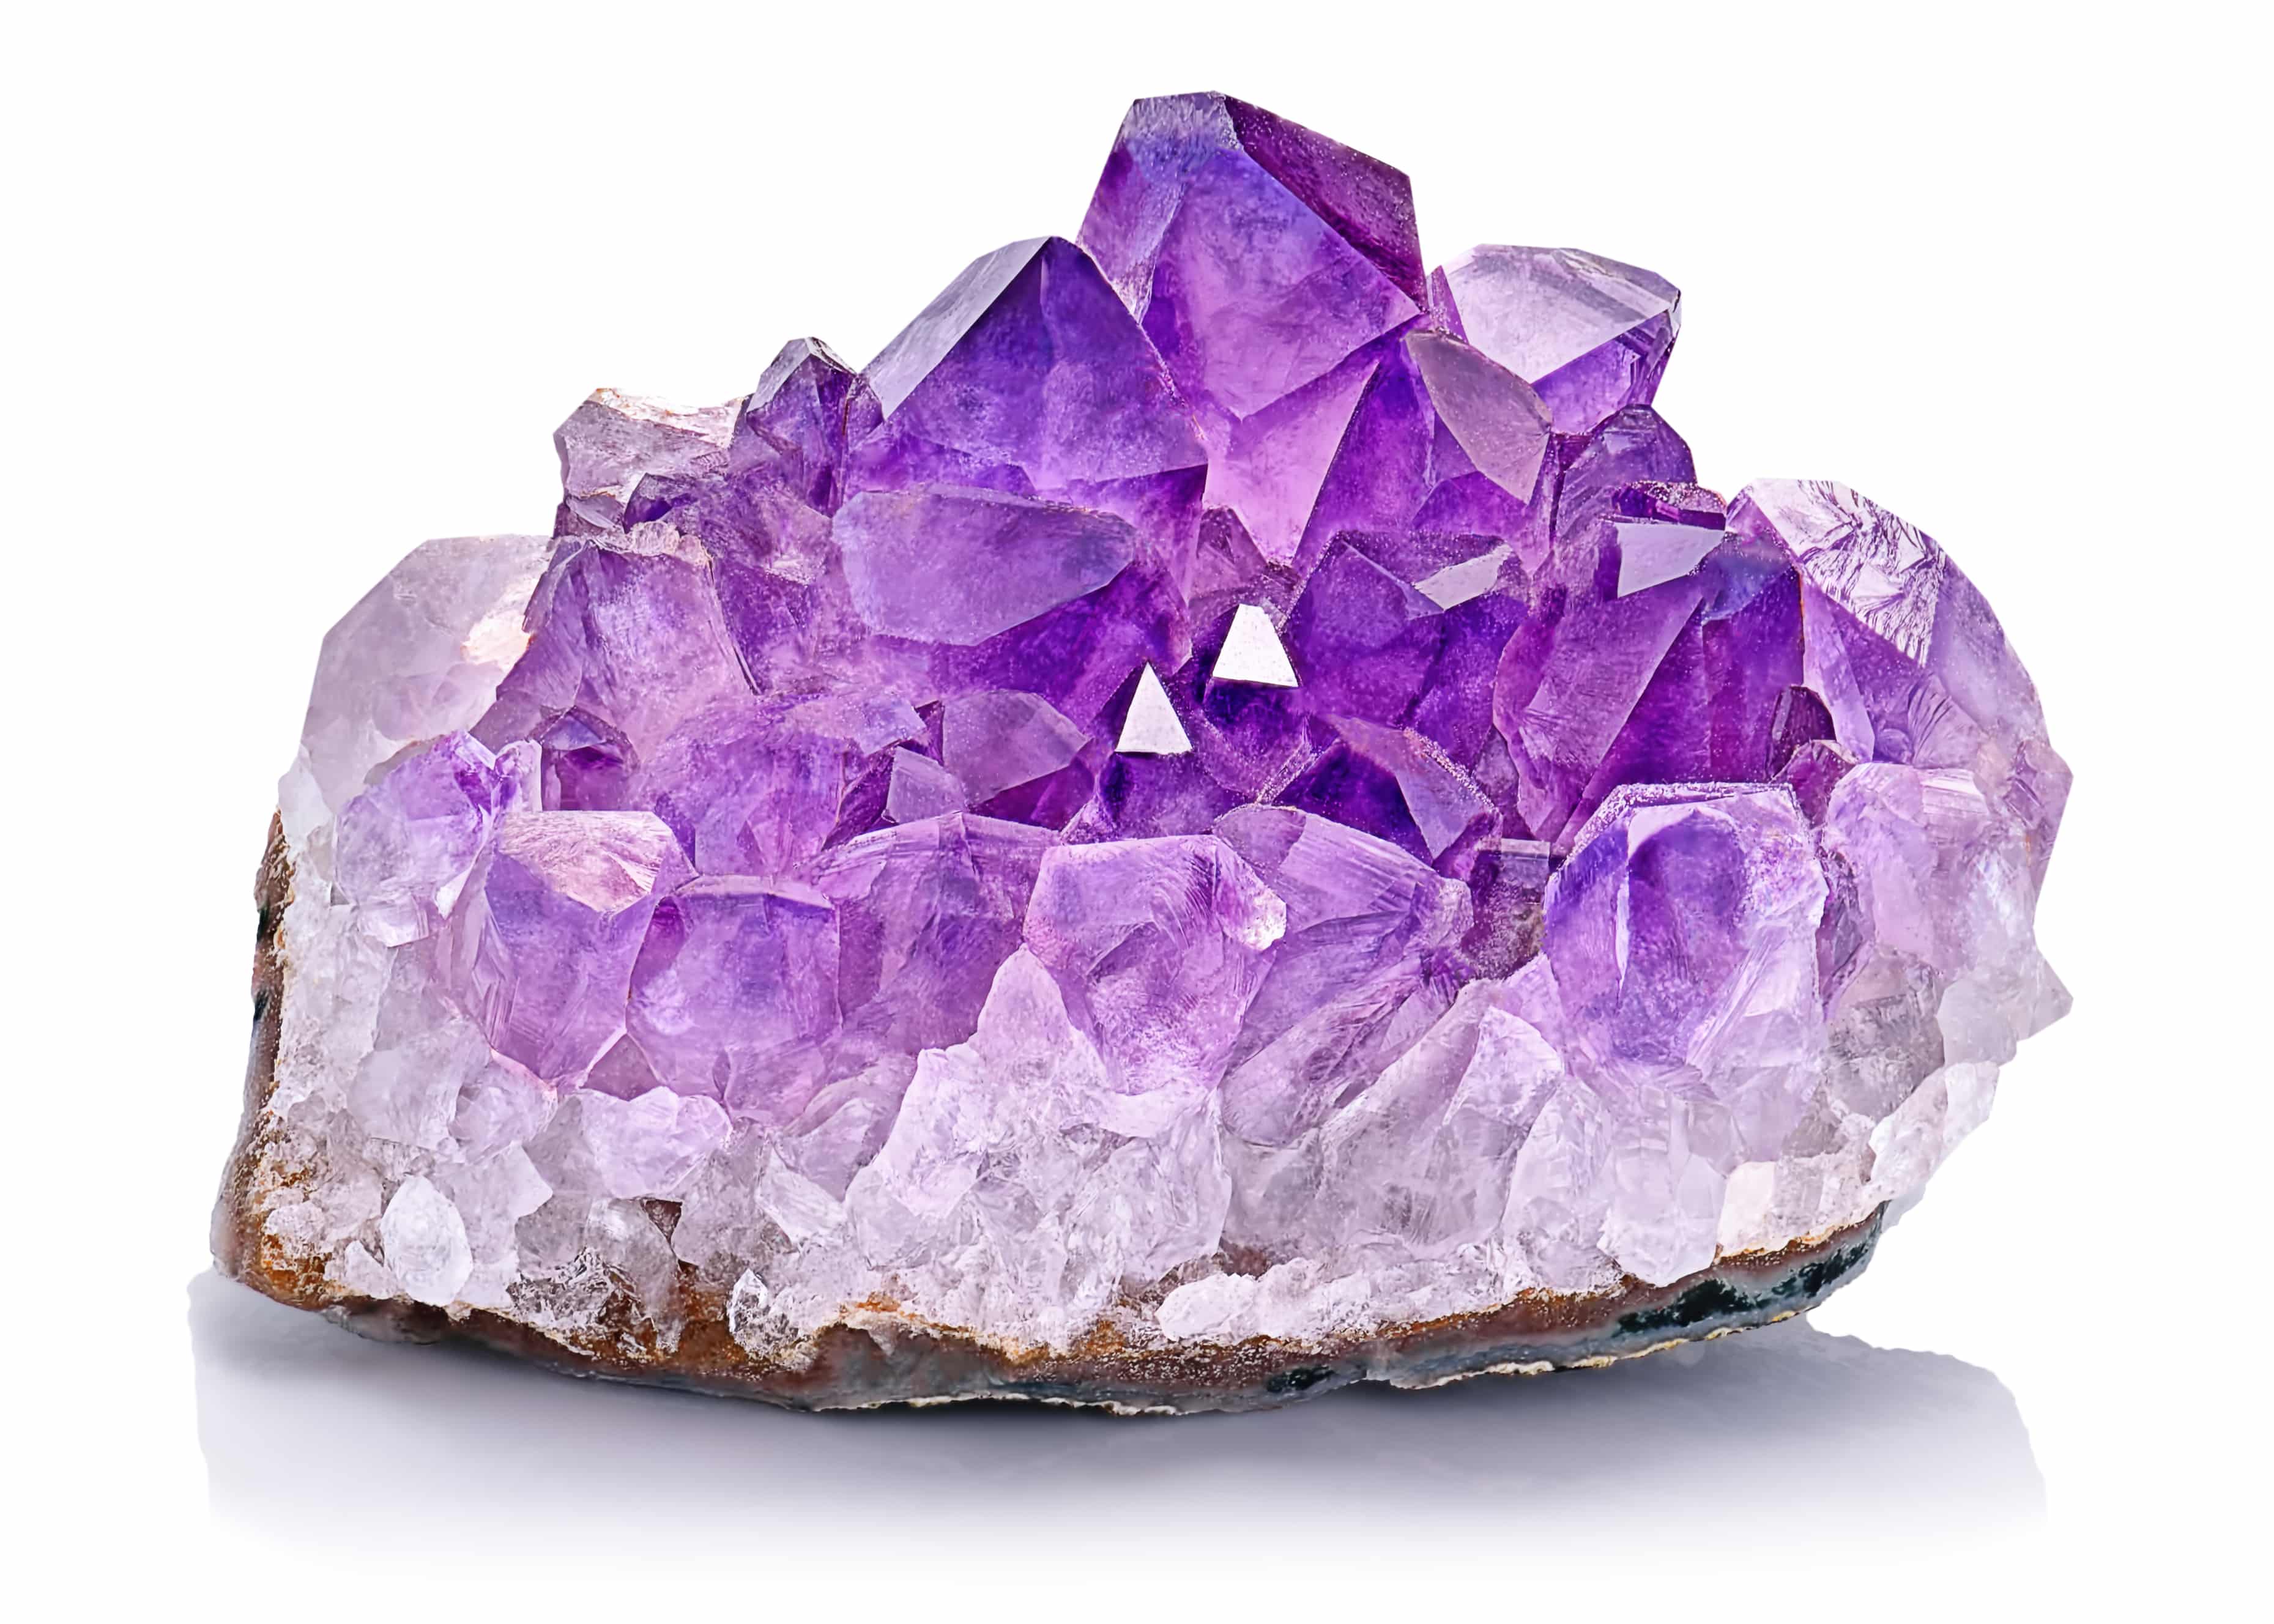 What Does Amethyst Mean Spiritually?